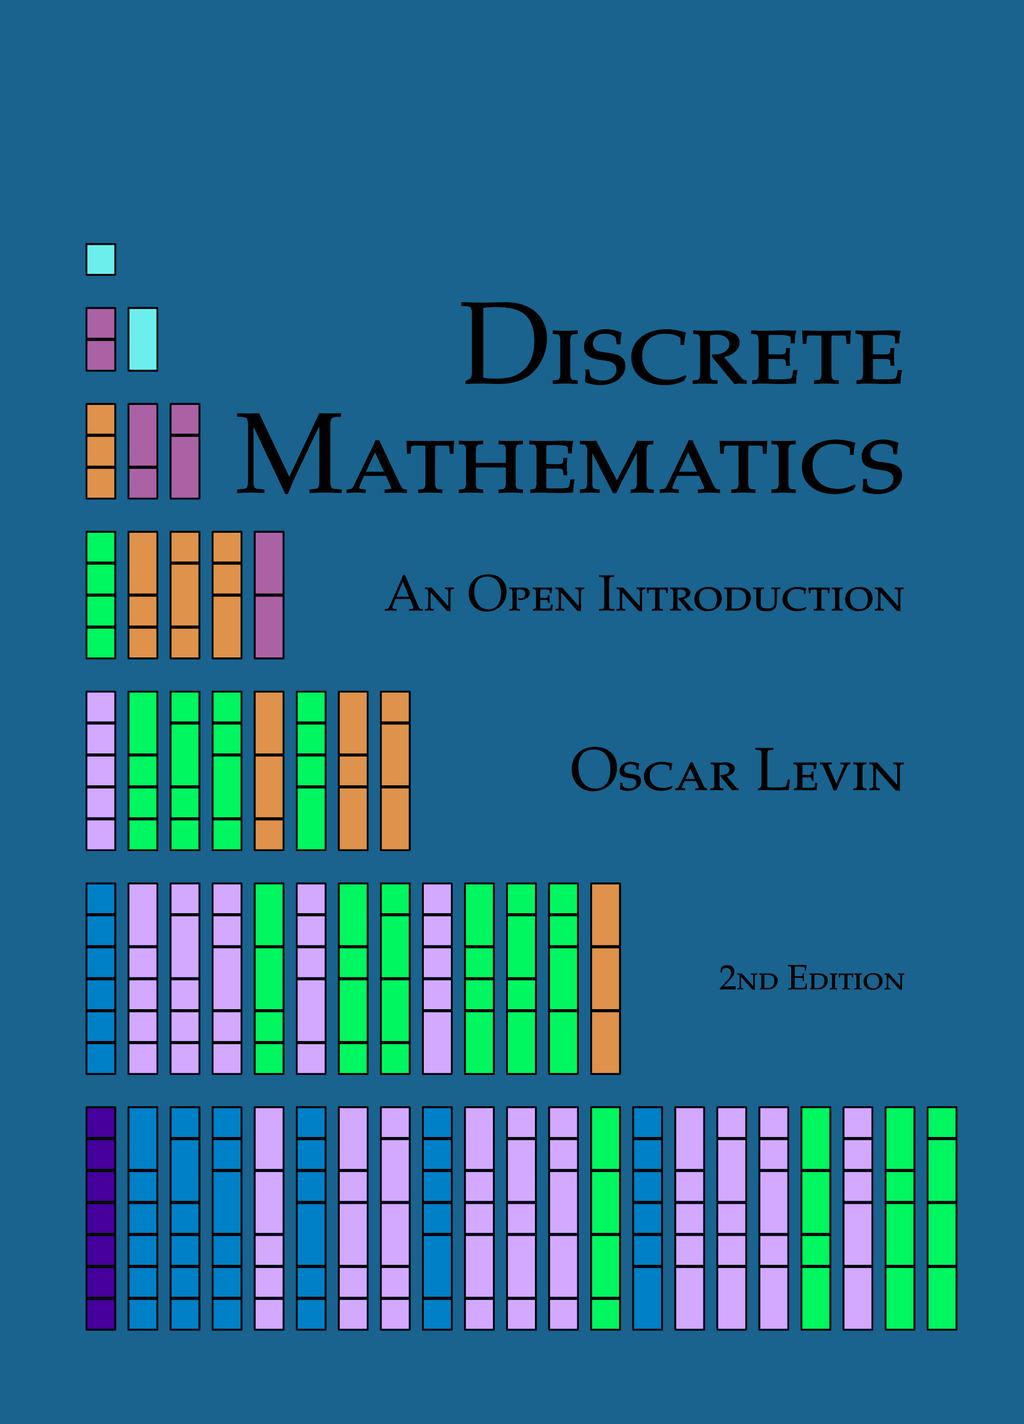 Textbook (10/32) The main recommended text is Oscar Levin, Discrete Mathematics: an open introduction, 2nd Edition. This is a free, open source textbook, available from http: // discretetext.